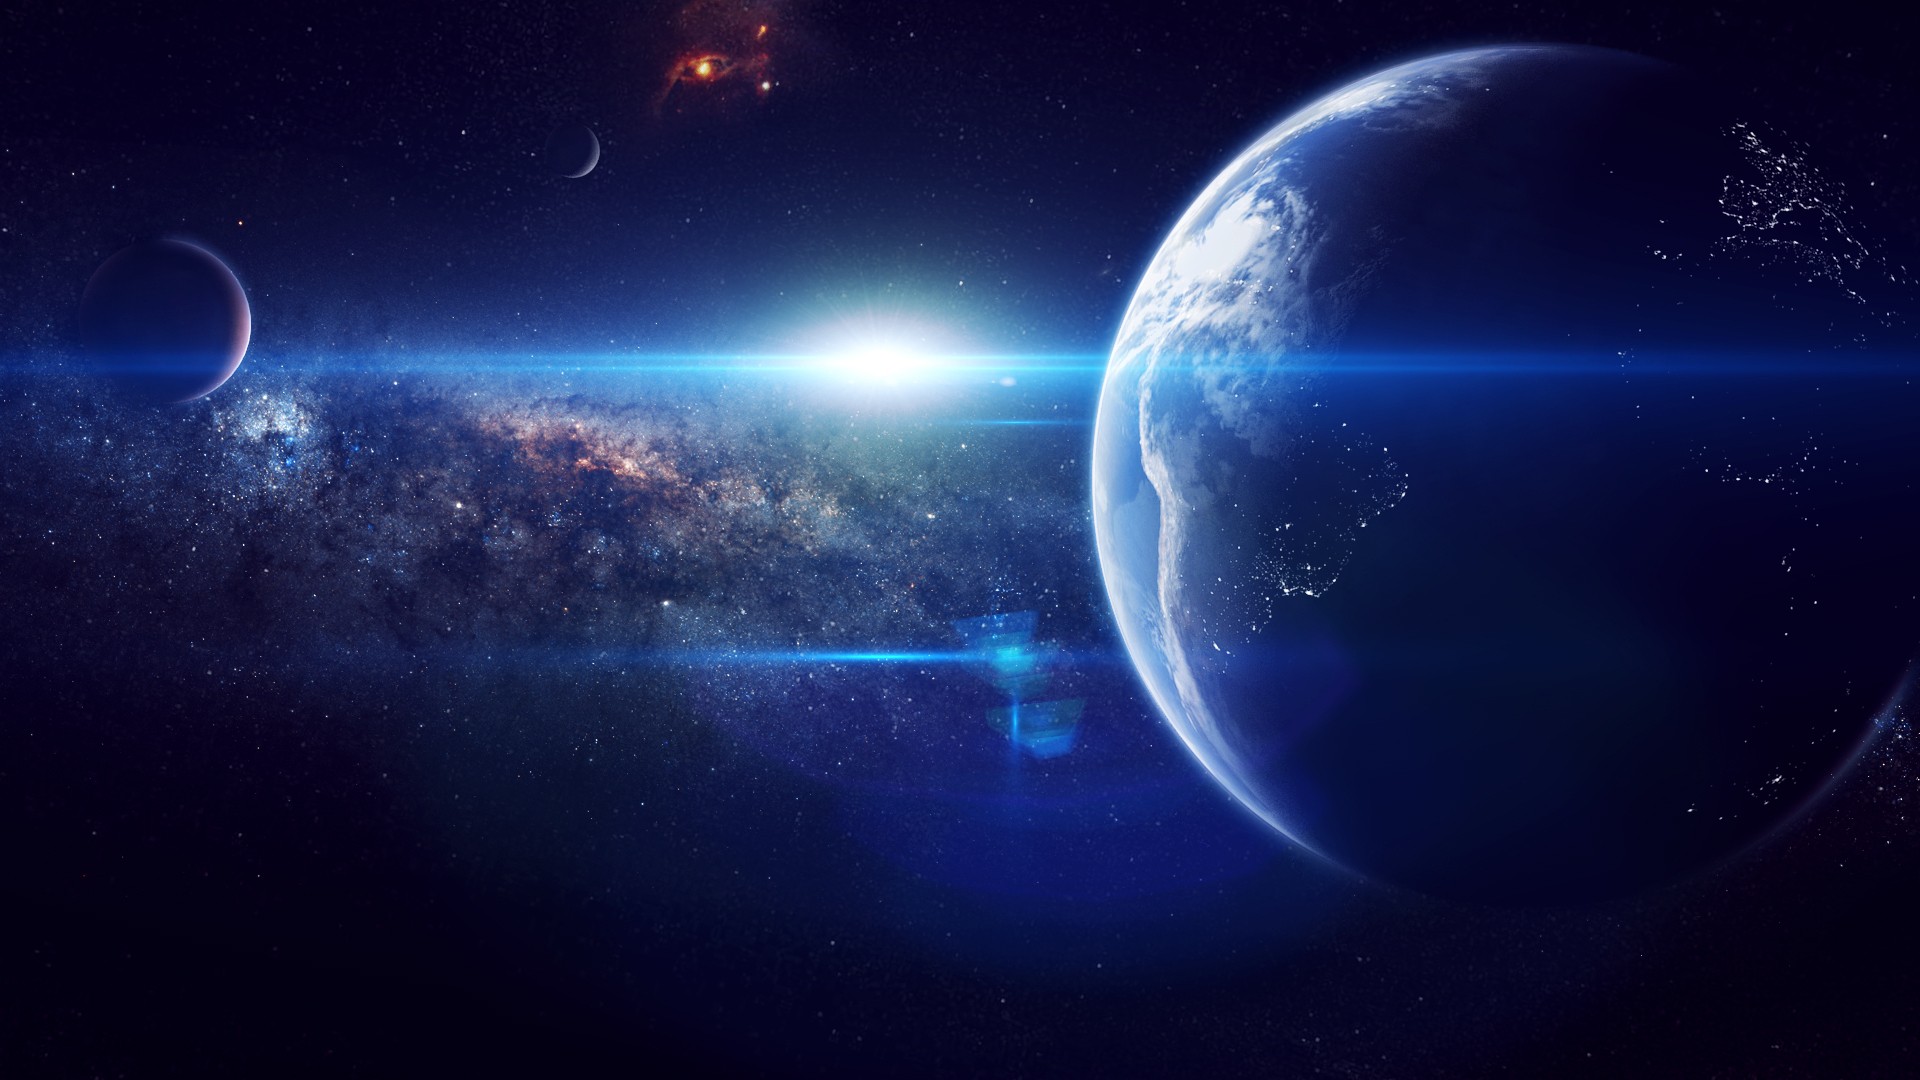 outer, Space, Stars, Explosions, Planets, Earth, Supernova Wallpaper